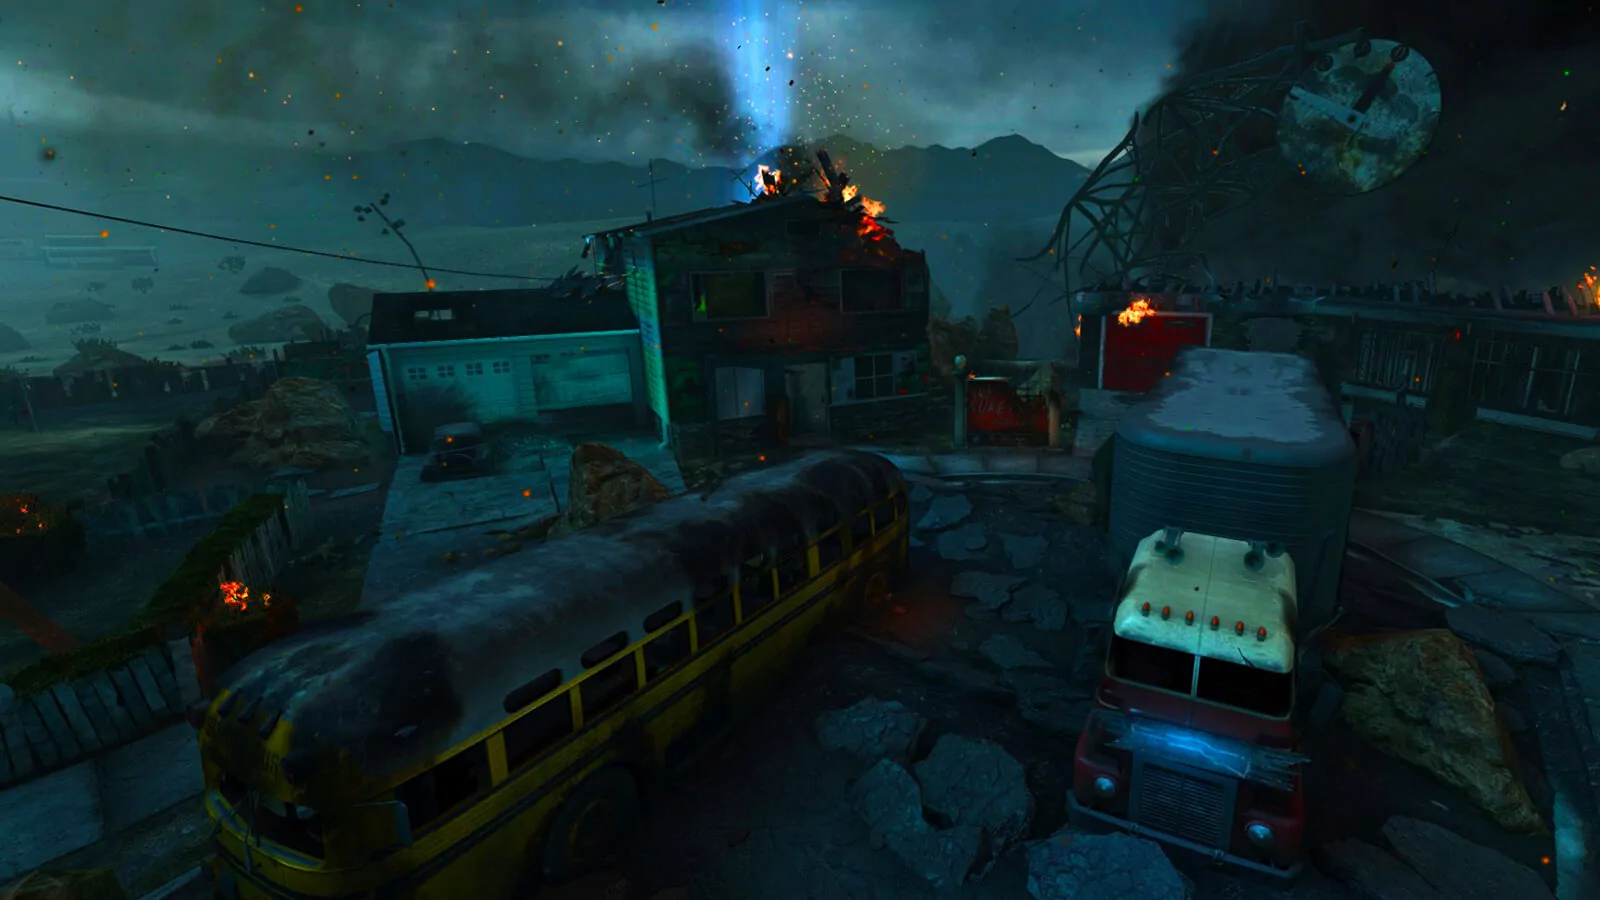 How to Get Black Ops 2 Nuketown Zombies Map DLC Free!! - video Dailymotion